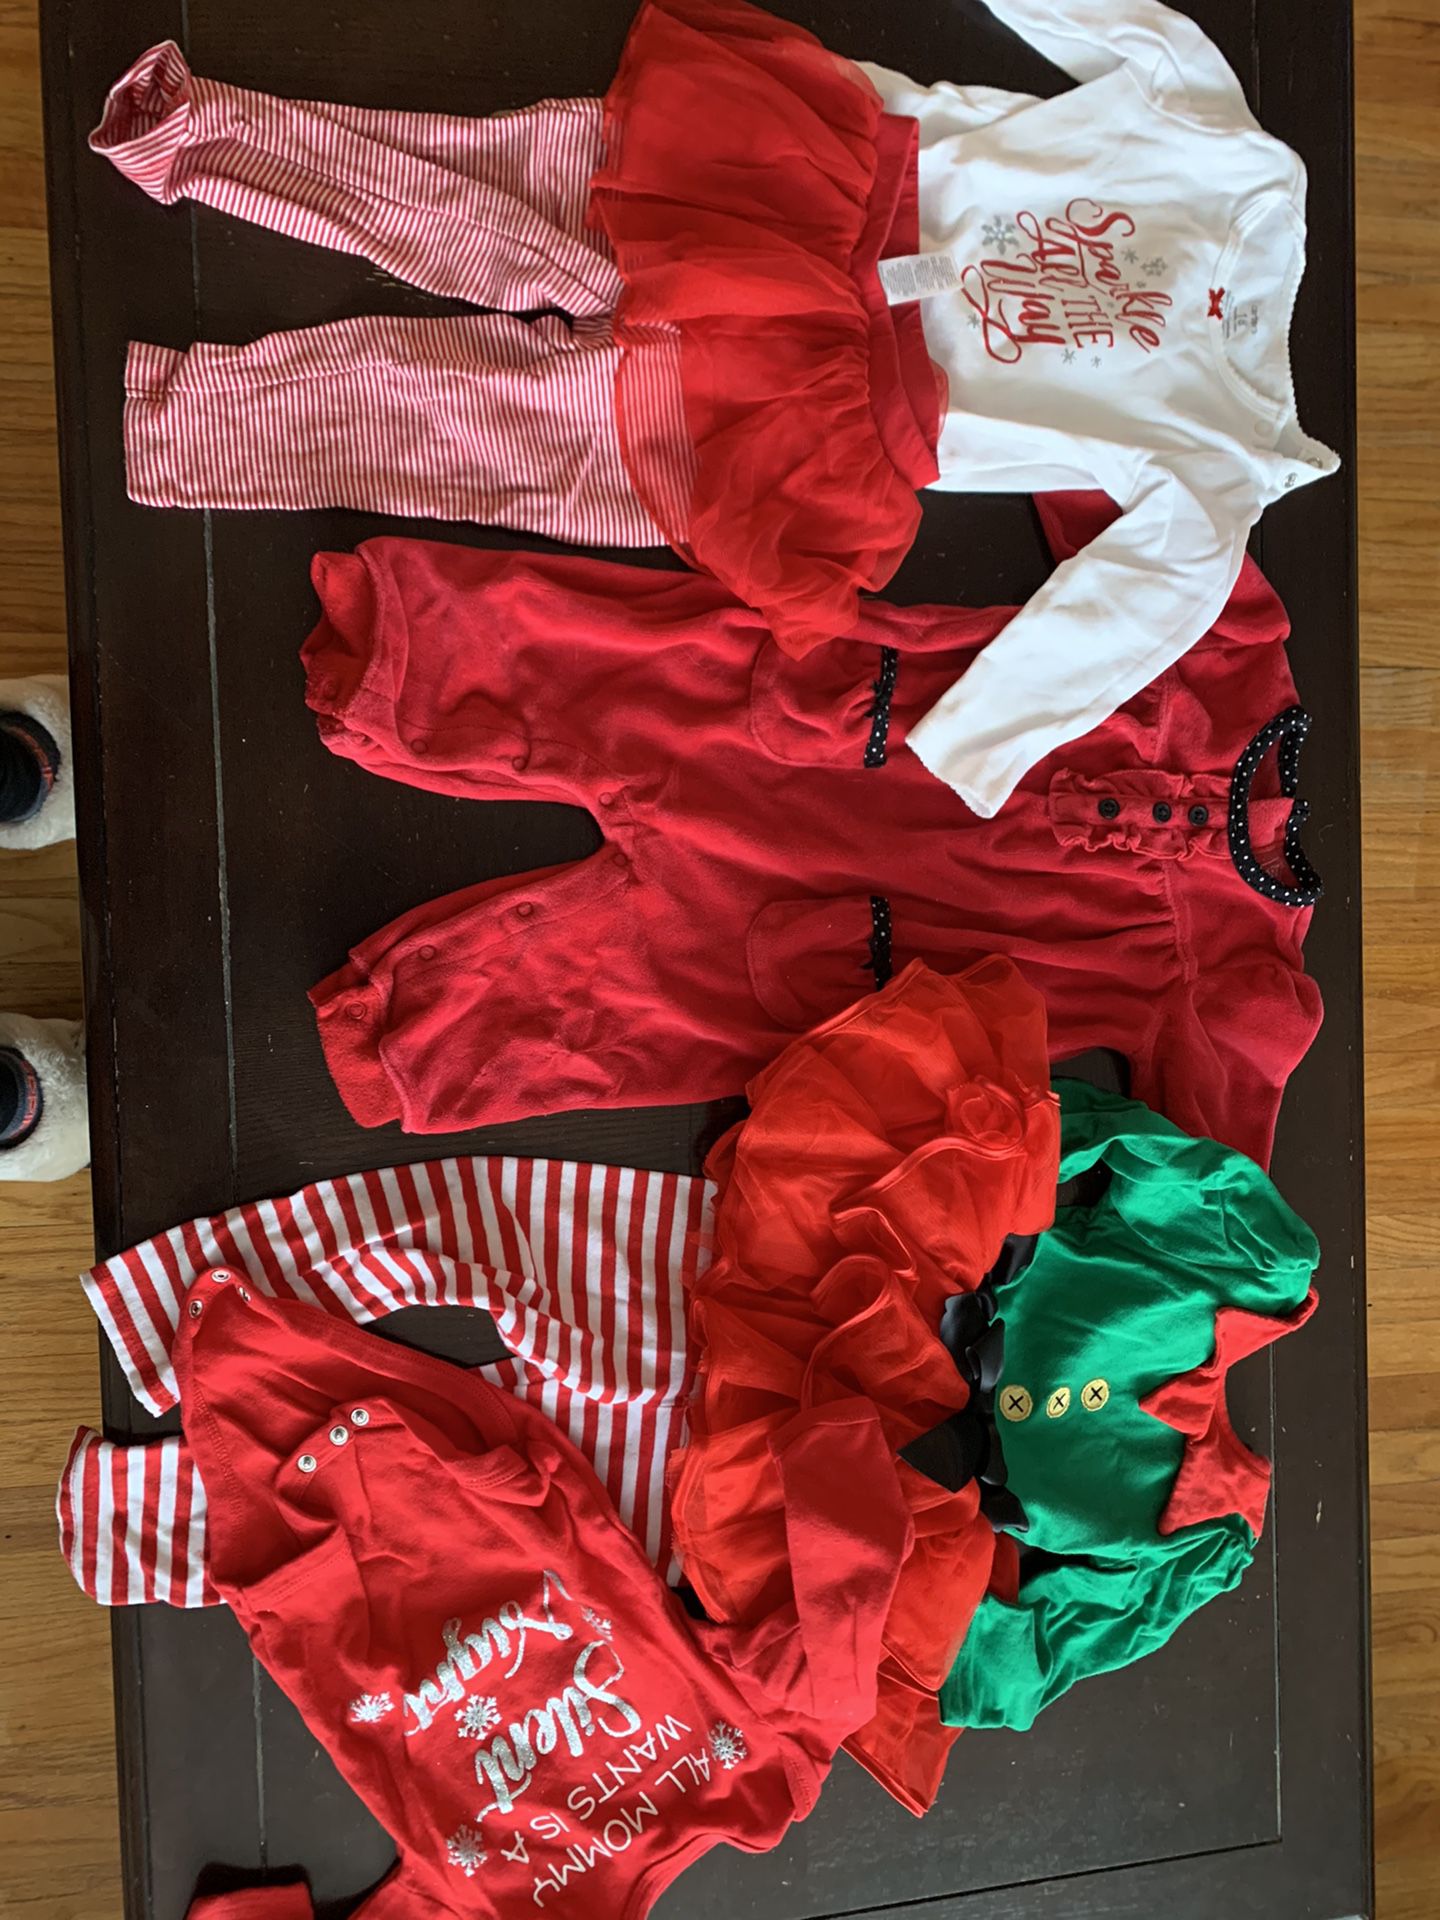 12-18 month Christmas outfits